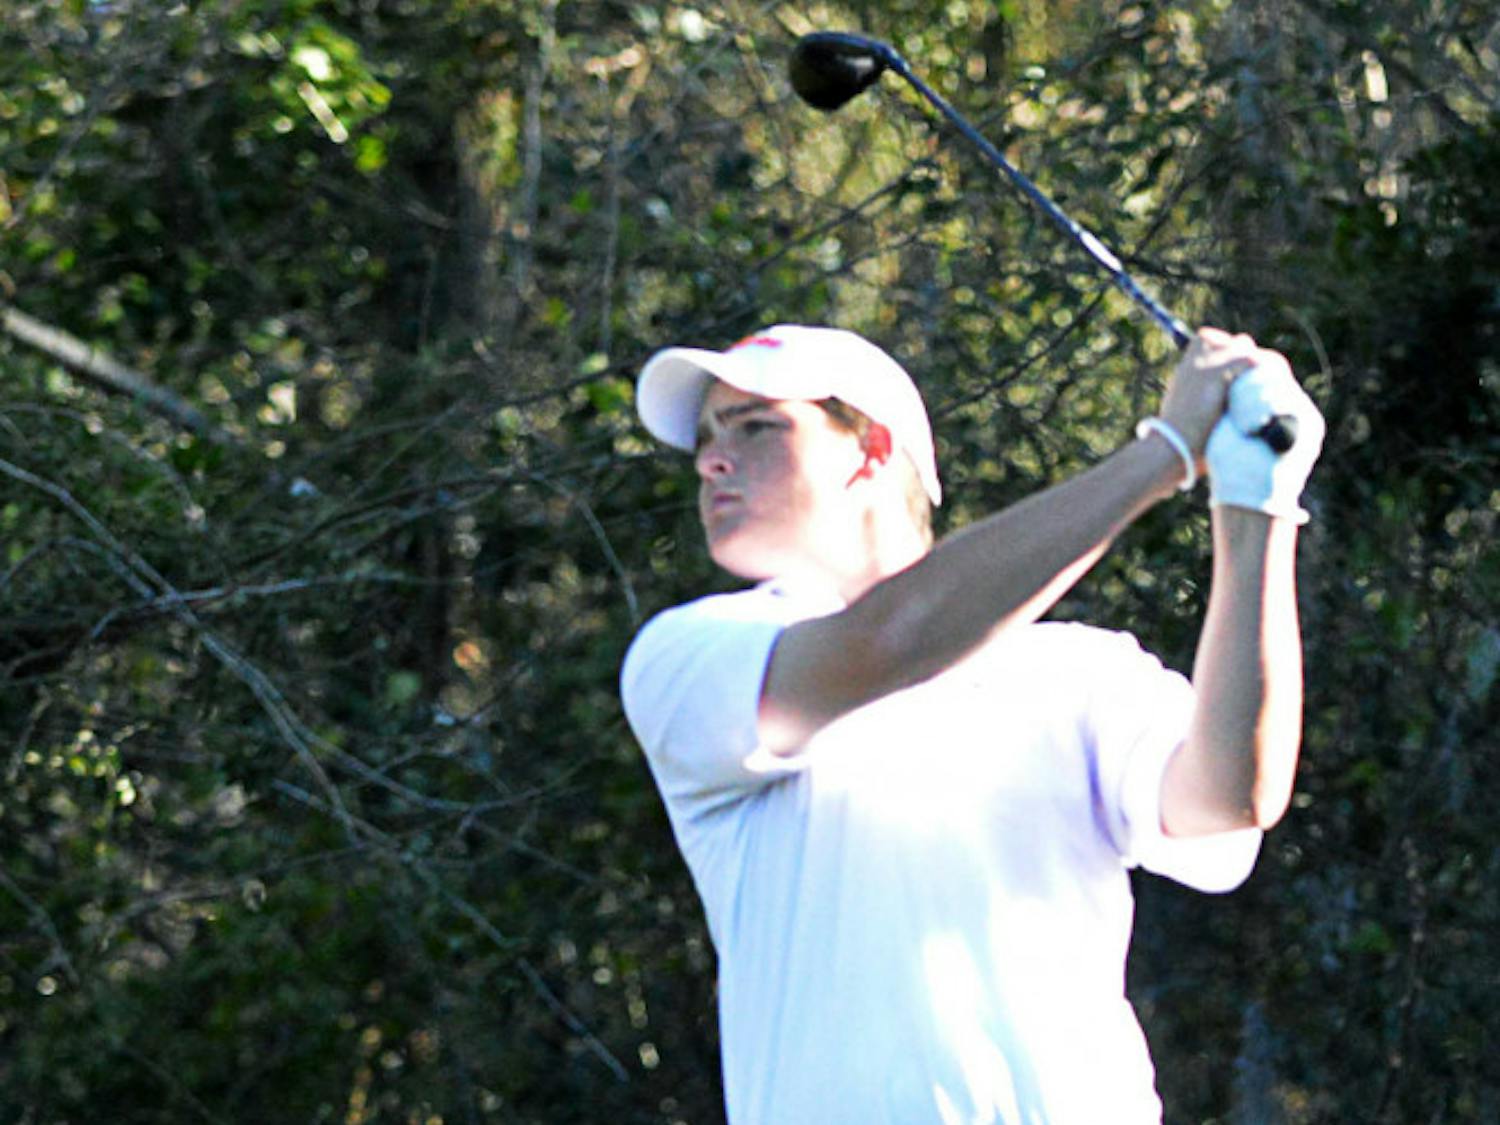 Ryan Orr tees off on Day 2 of the SunTrust Gator Invitational on Feb. 16 at the Mark Bostick Golf Course.